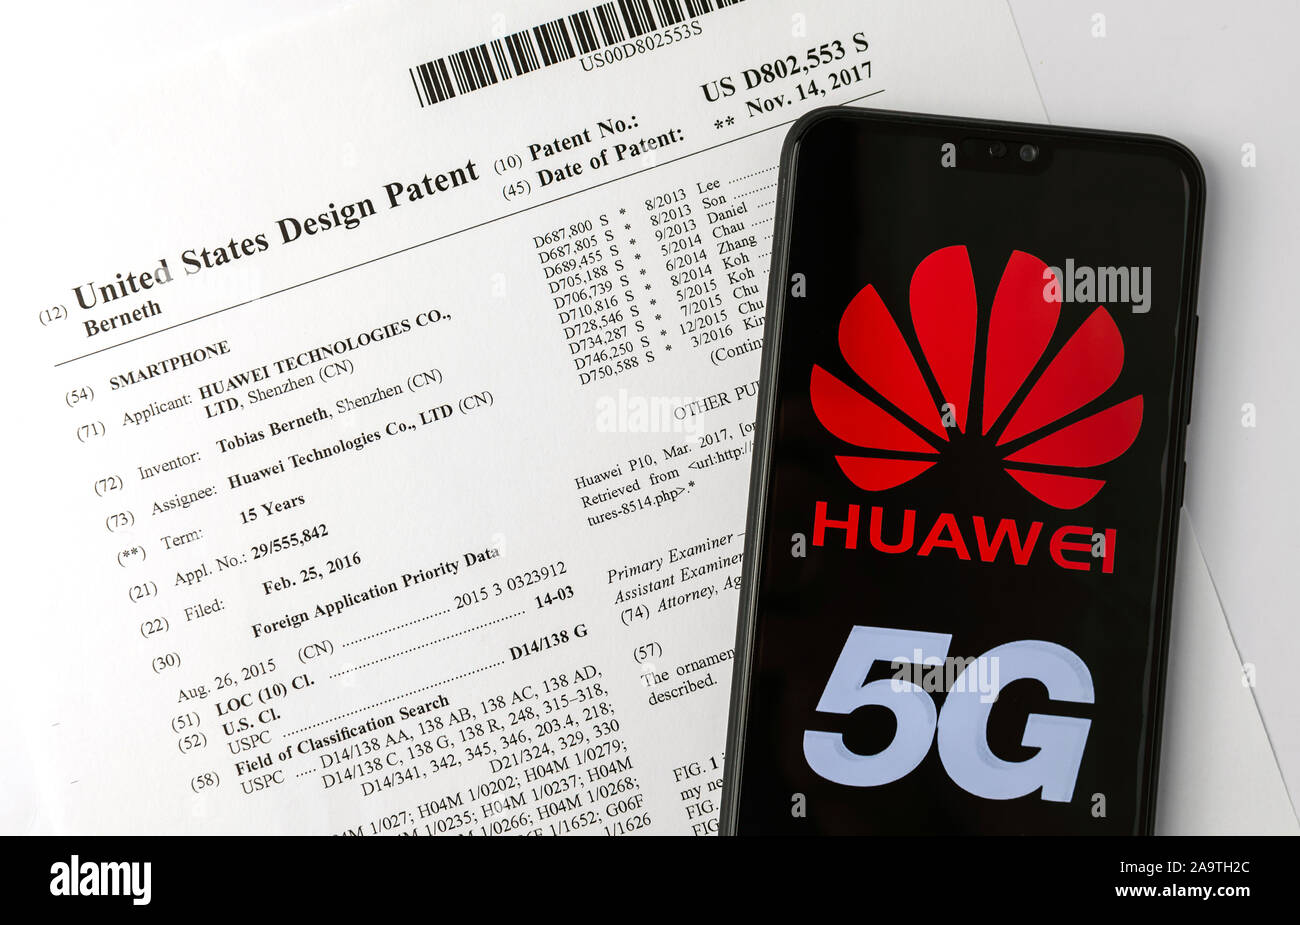 HUAWEI US patent on Chinese smartphone technologies patented in the US and mobile device with HUAWEI 5G logo. Stock Photo